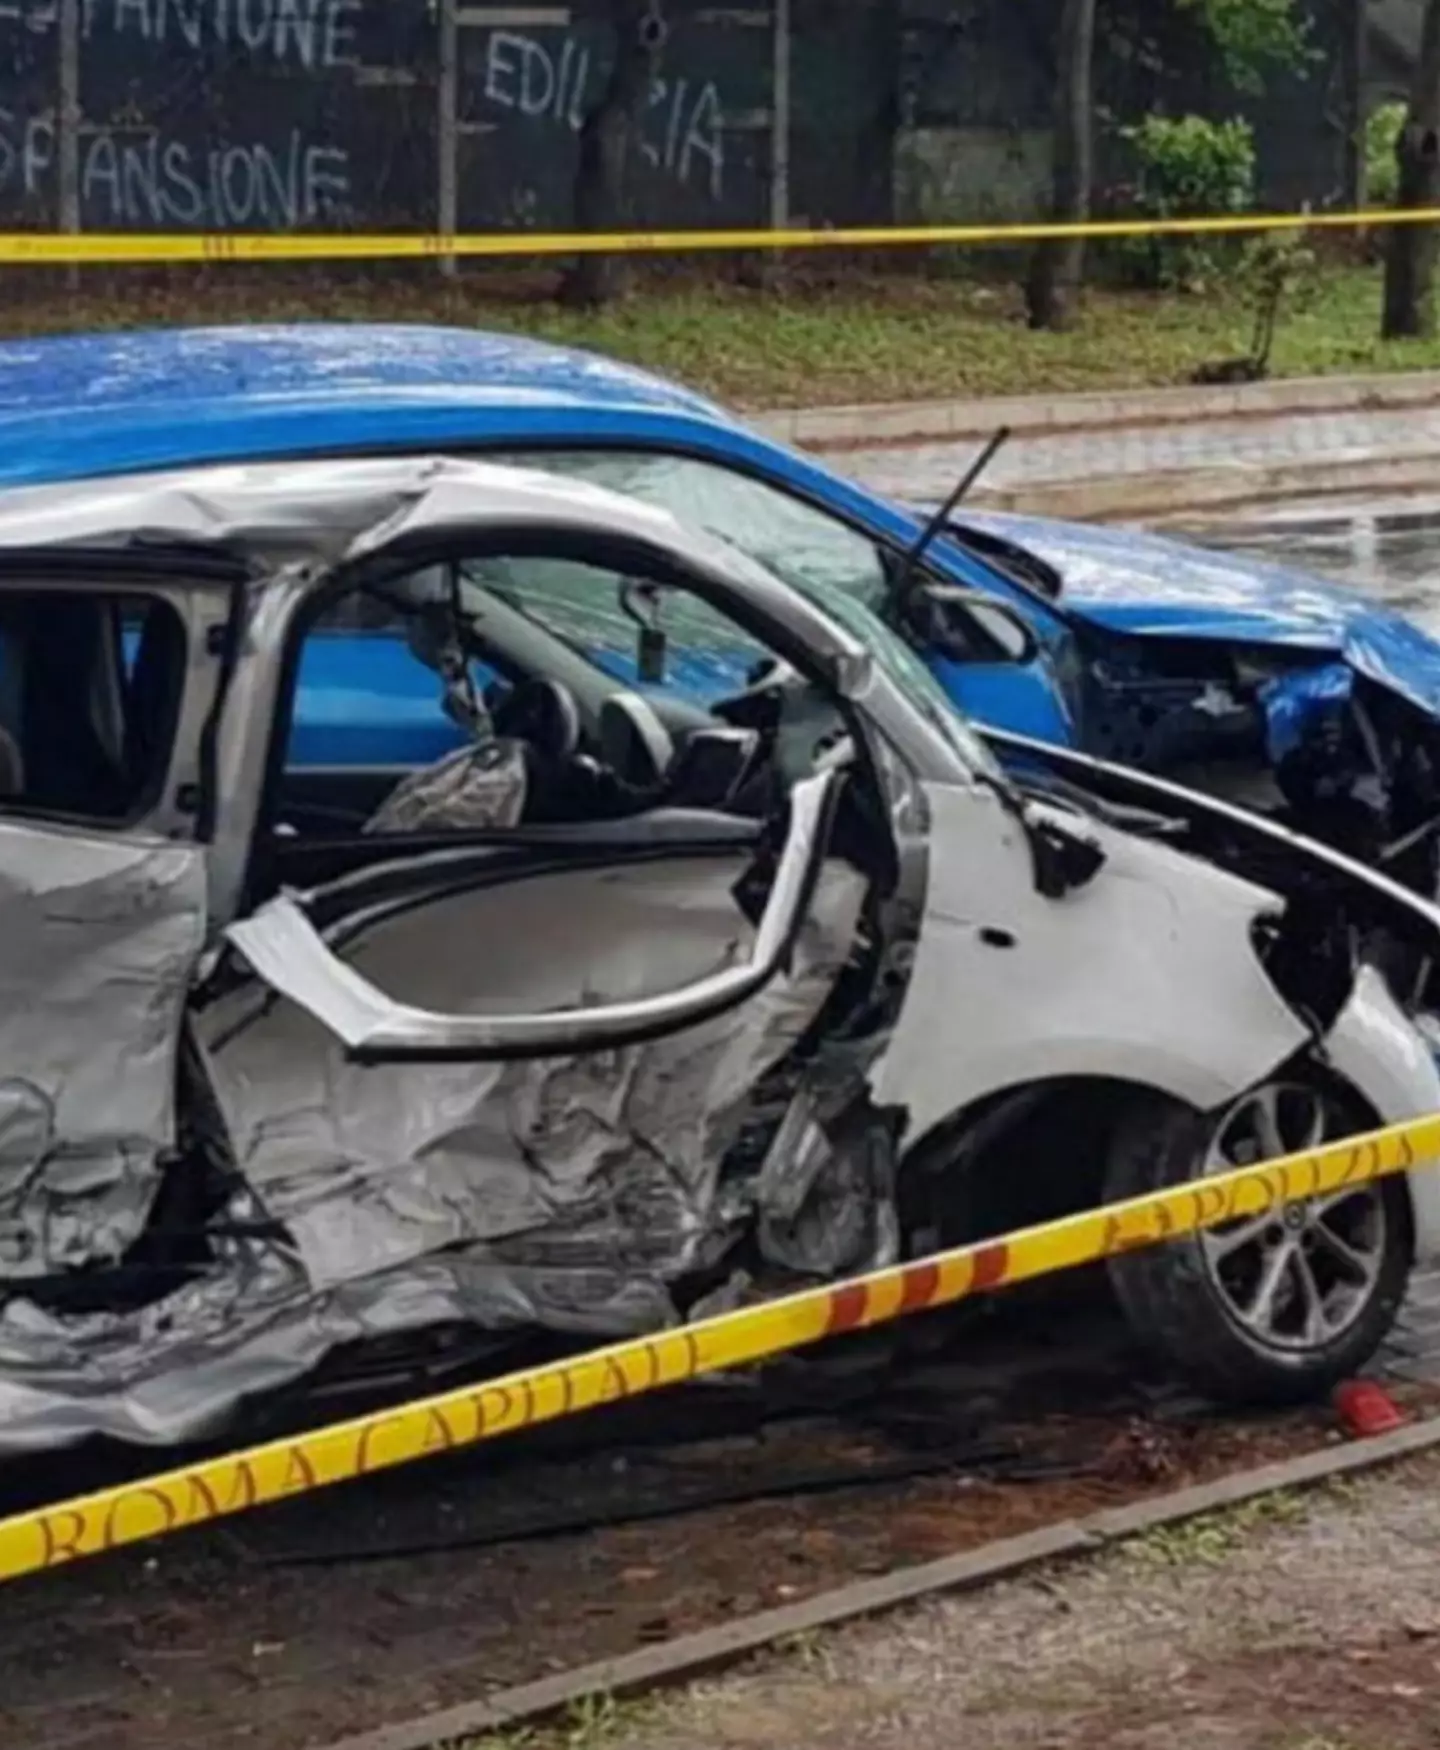 The child was sitting in a Smart ForFour when it was crashed by a Lamborghini Urus SUV.